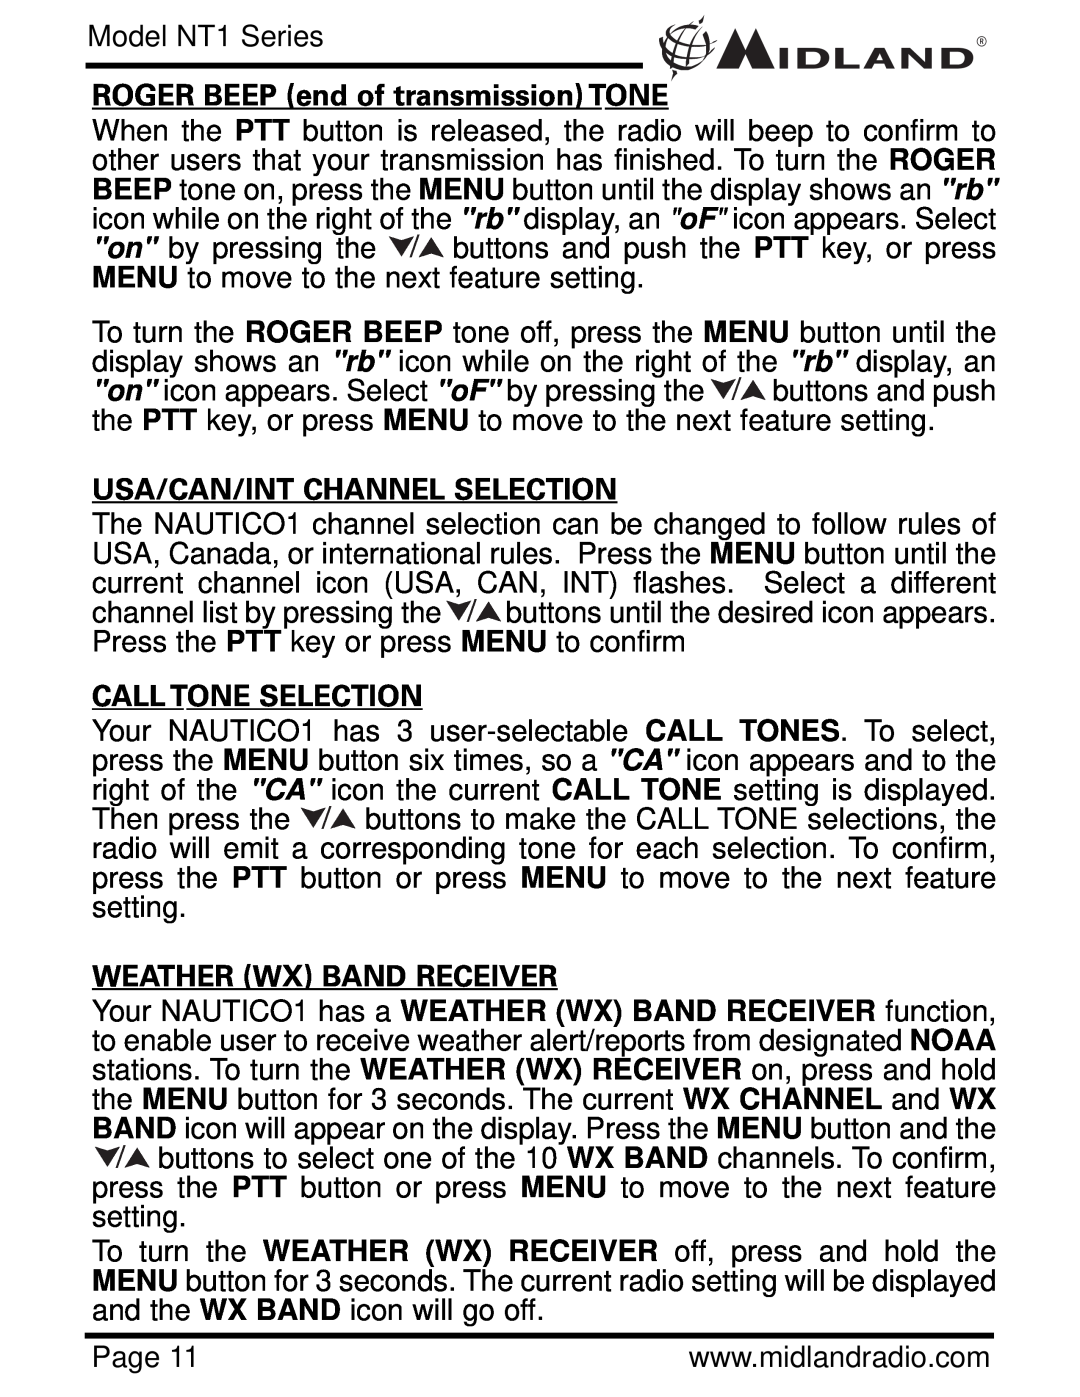 Midland Radio NT1 SERIES, NT1VP ROGER BEEP end of transmission TONE, Usa/Can/Int Channel Selection, Call Tone Selection 